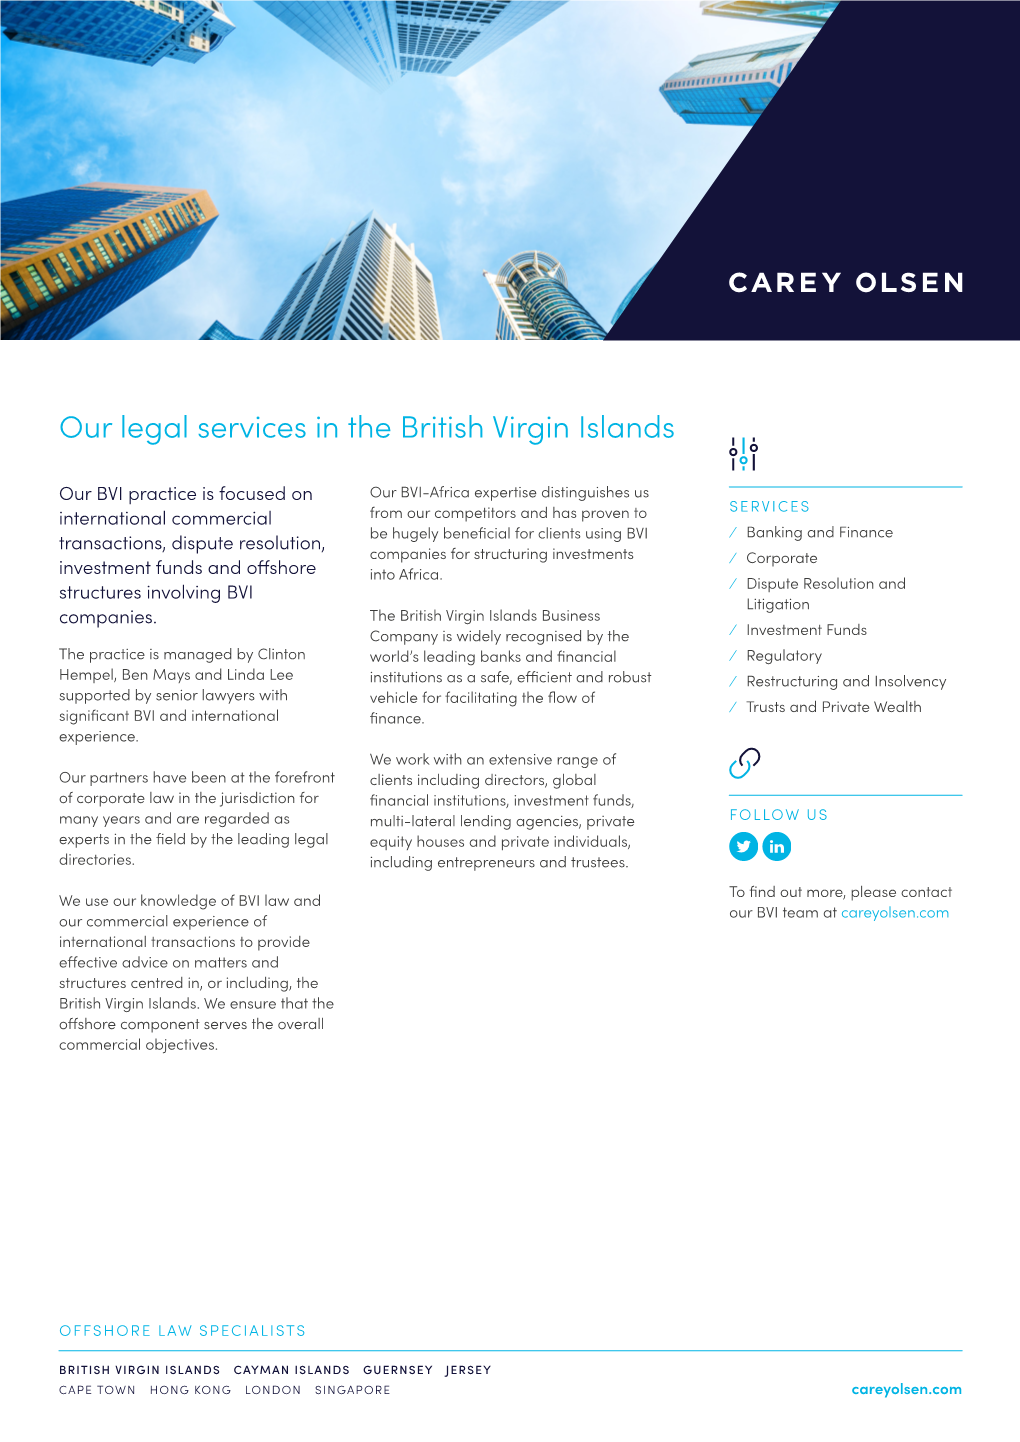 Our Legal Services in the British Virgin Islands